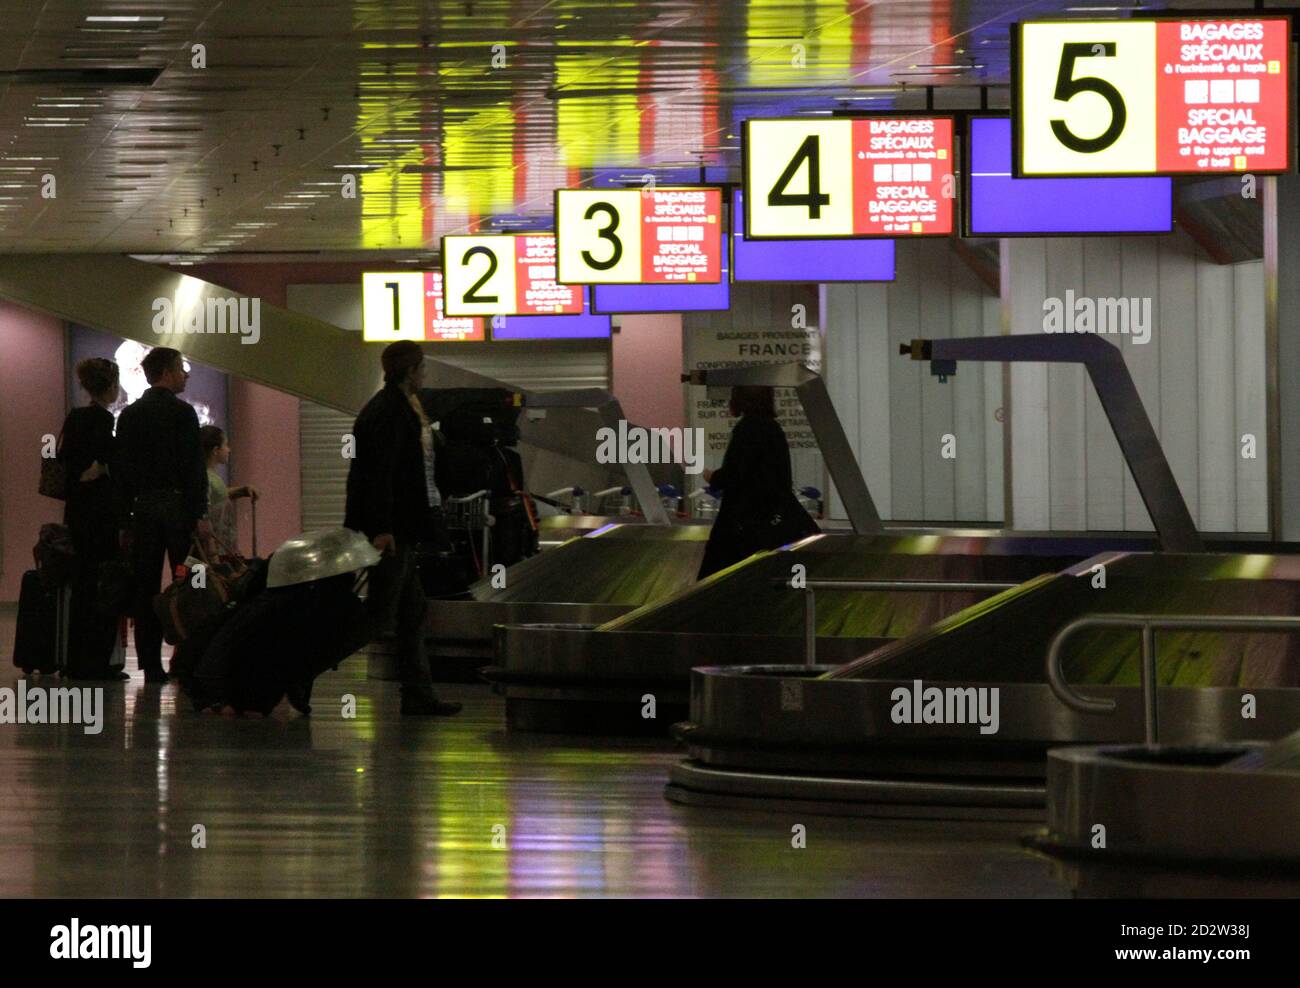 Passengers collect their luggage after their arrival at Cointrin airport in  Geneva April 20, 2010. Switzerland's civil aviation authority has decided  to reopen Swiss air space from 0600 GMT on Tuesday following